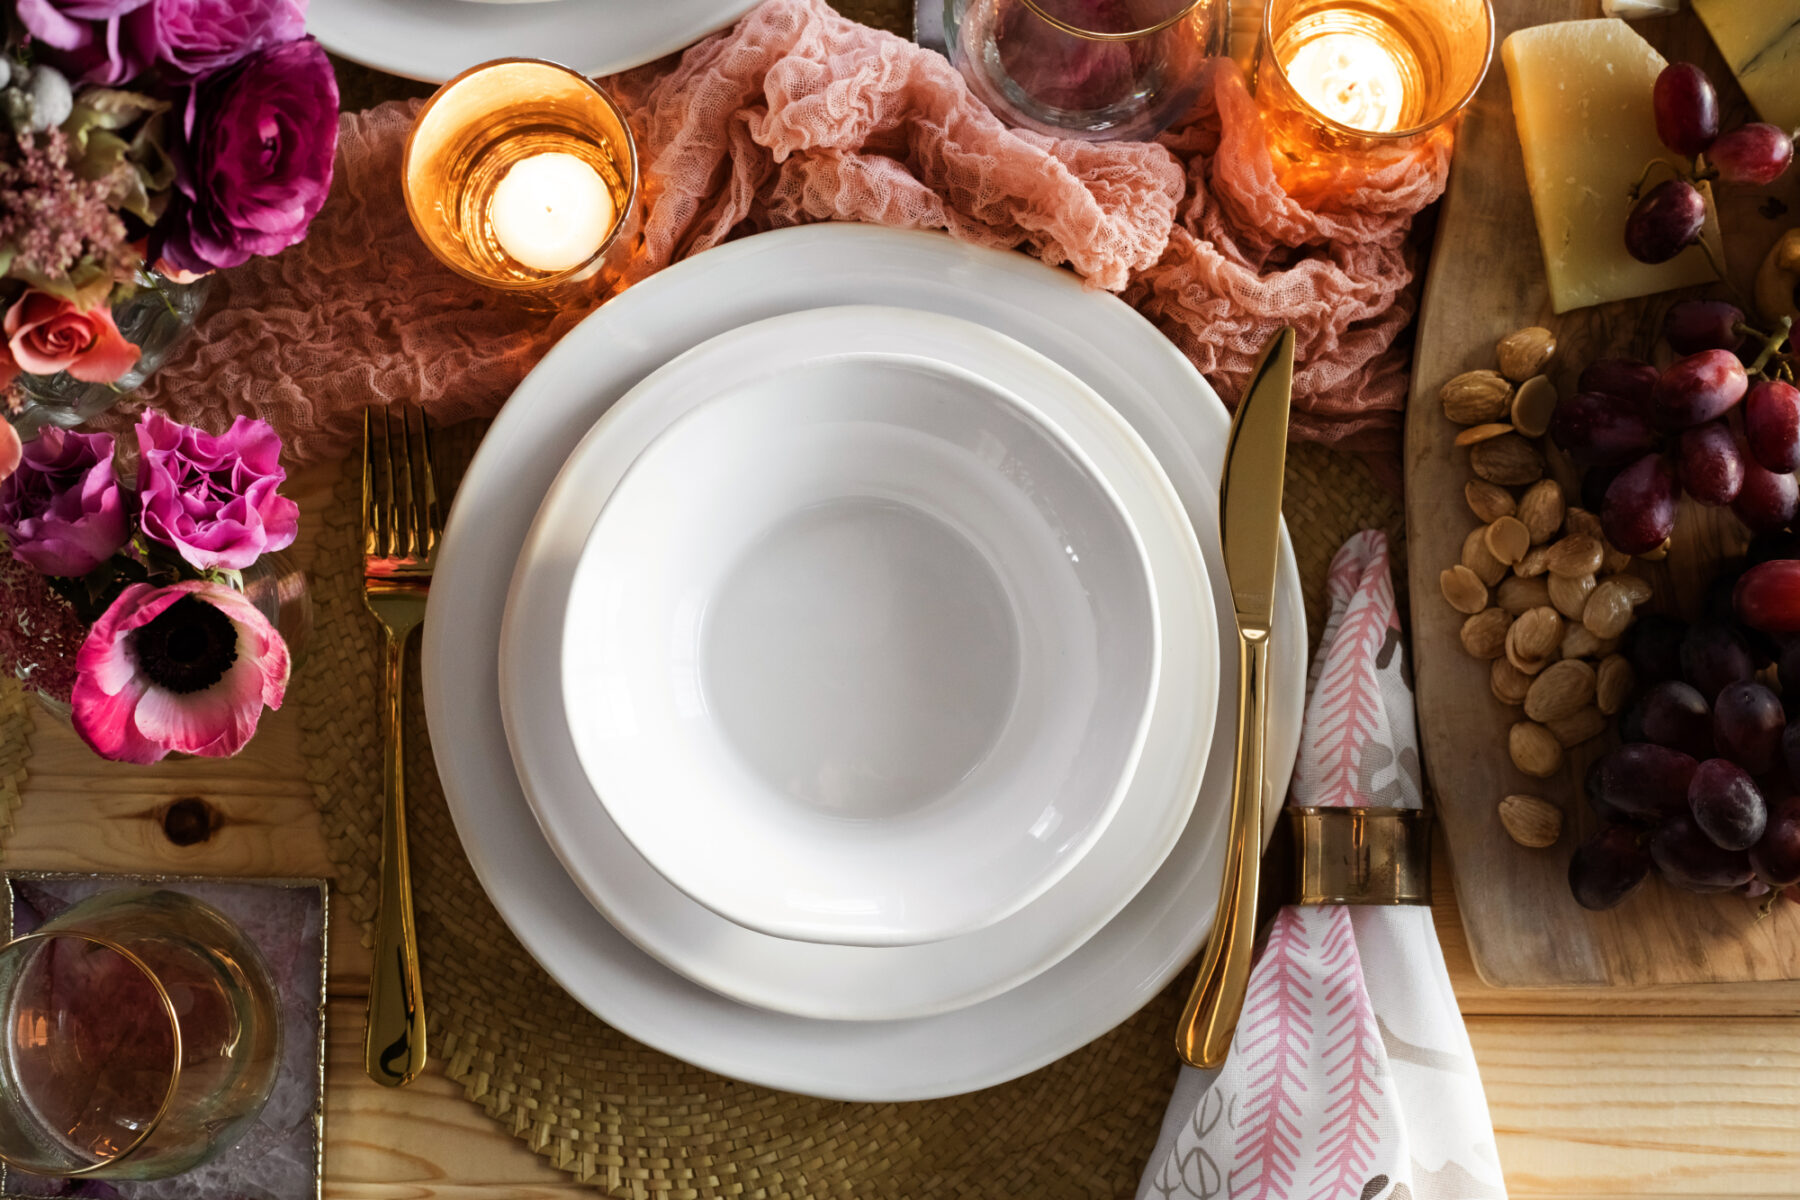 VIETRI - An Intimate Plate setting with Gold Flatware and White Plates